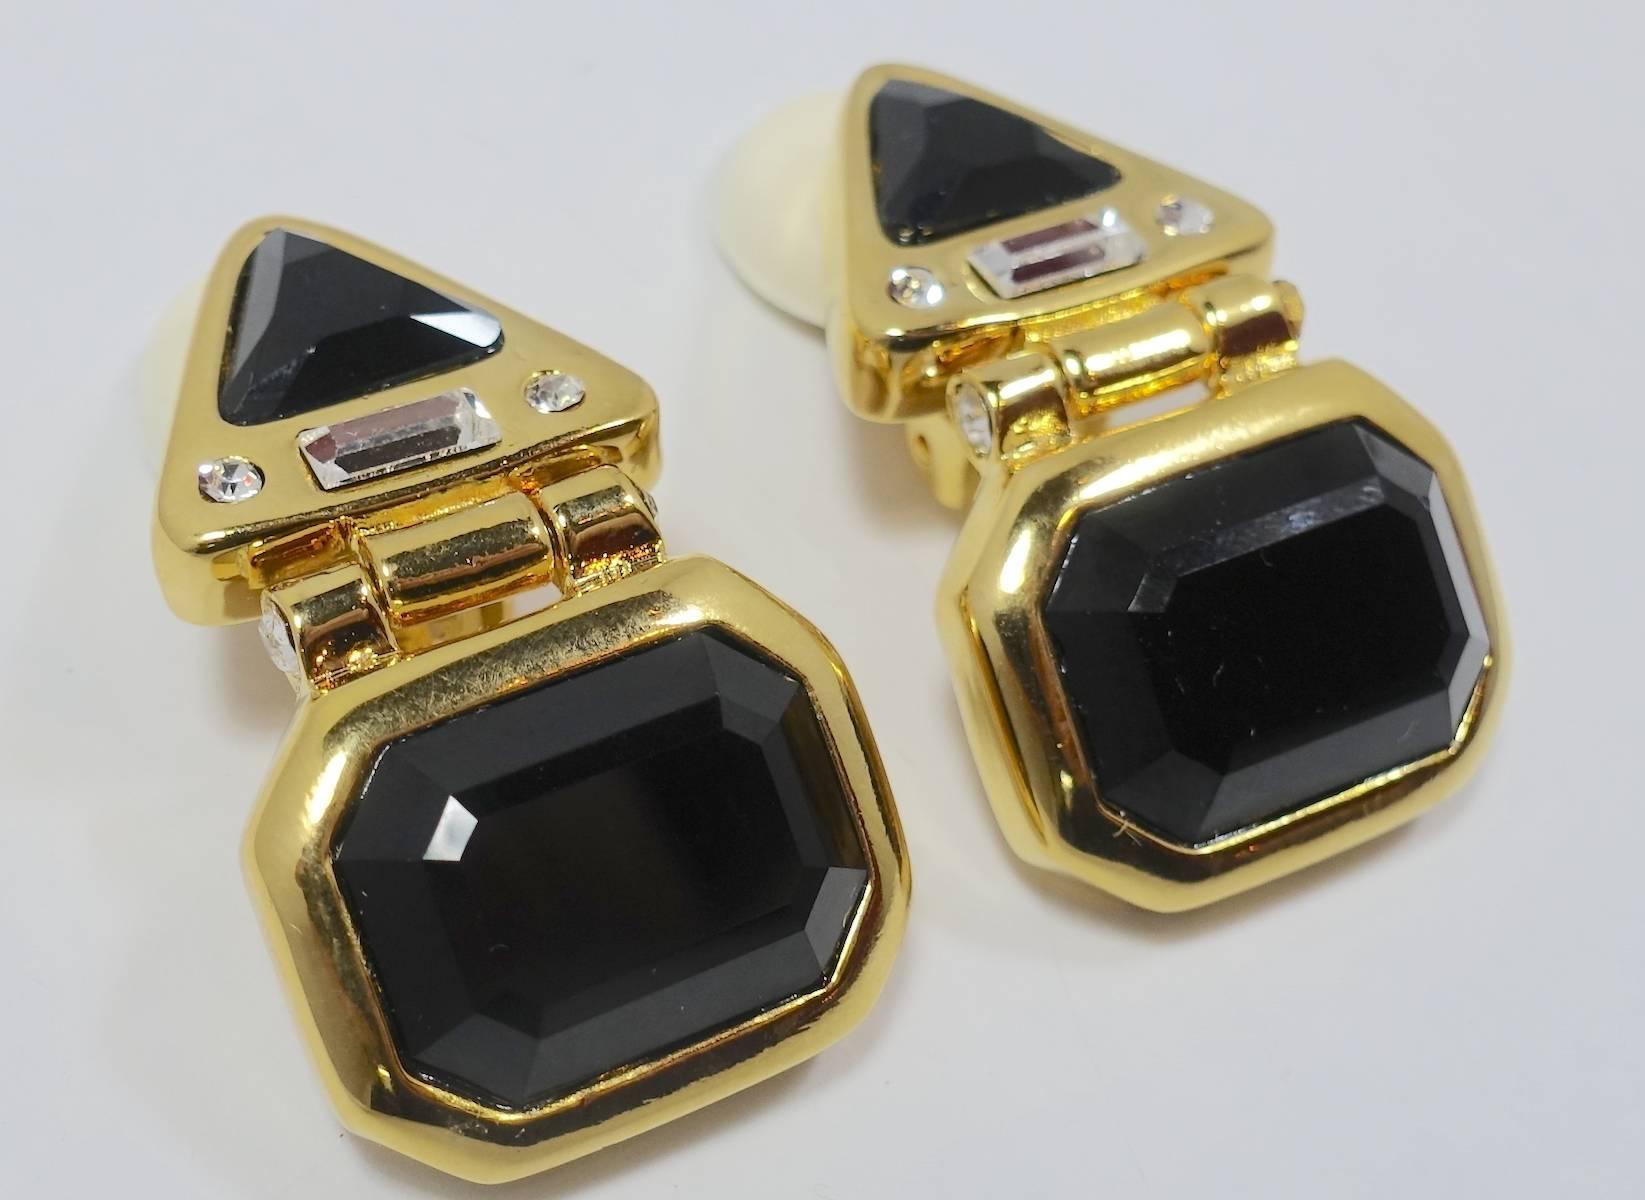 These Kenneth Jay Lane clip earrings feature black and clear rhinestones in a gold tone setting.  These earrings measure 1-5/8” x 7/8” and are signed “Kenneth Lane”. They are in excellent condition.